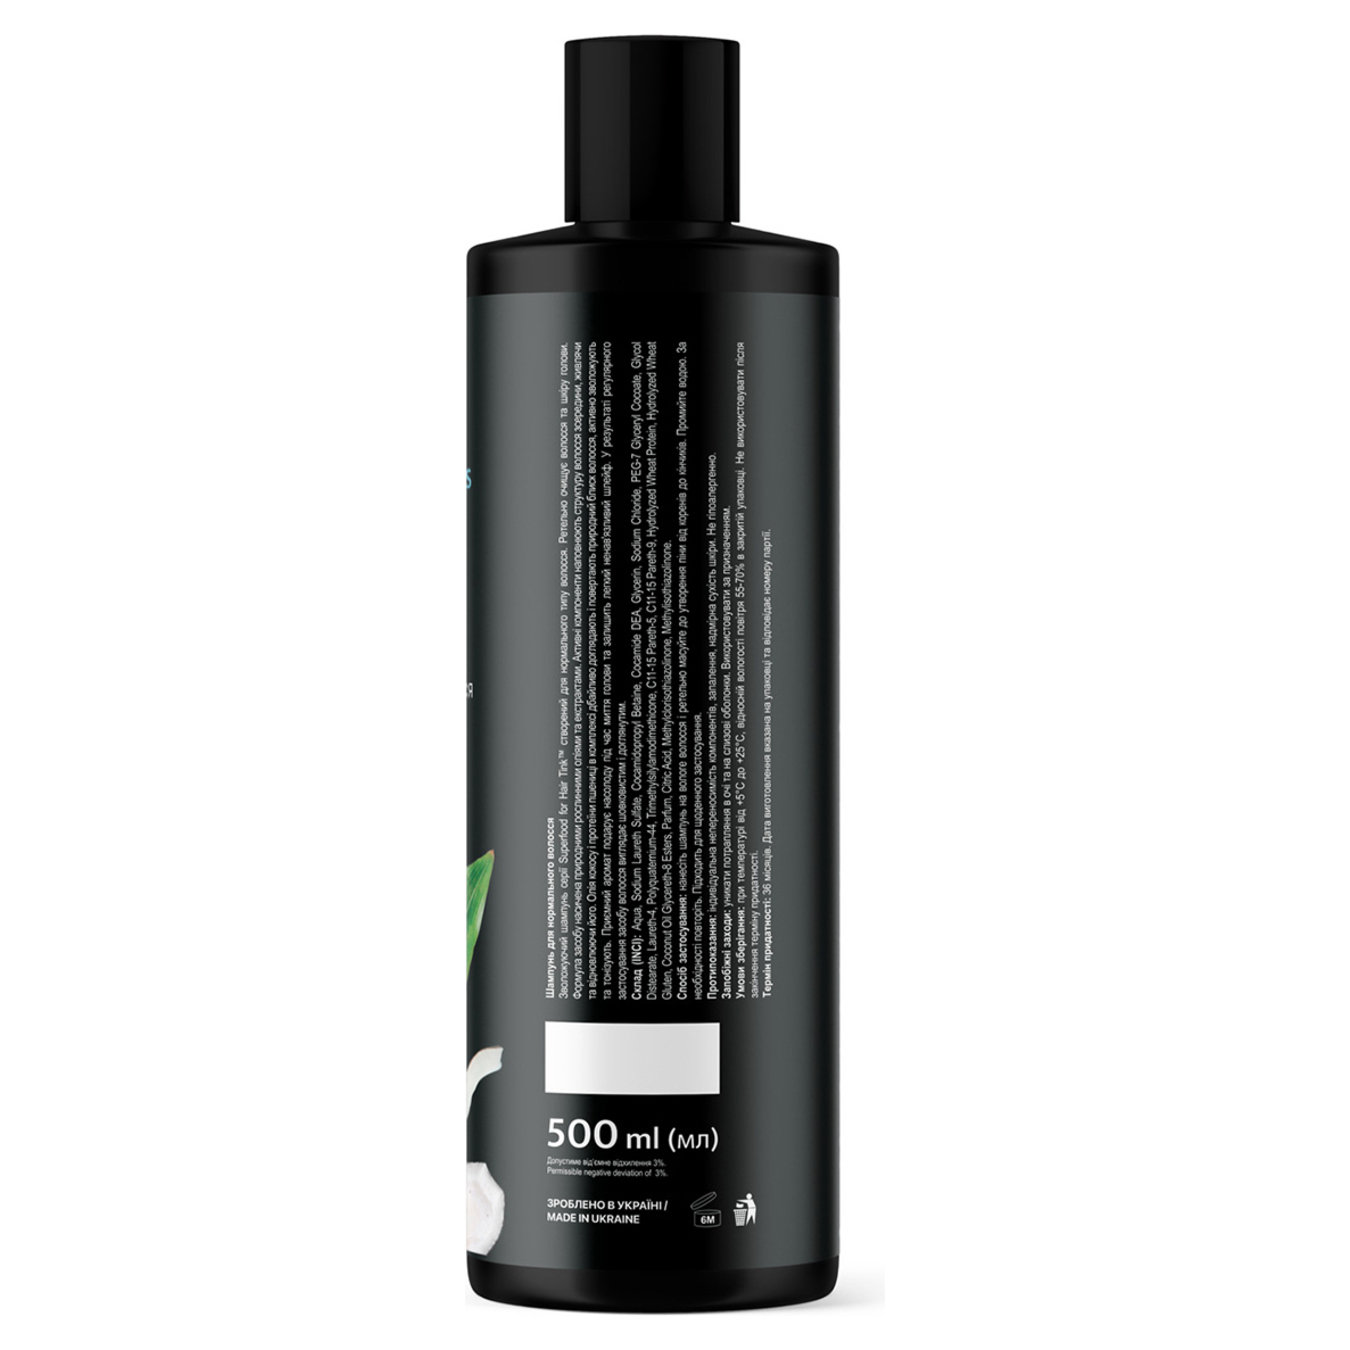 Shampoo Tink Coconut Wheat proteins for normal hair 500ml 3